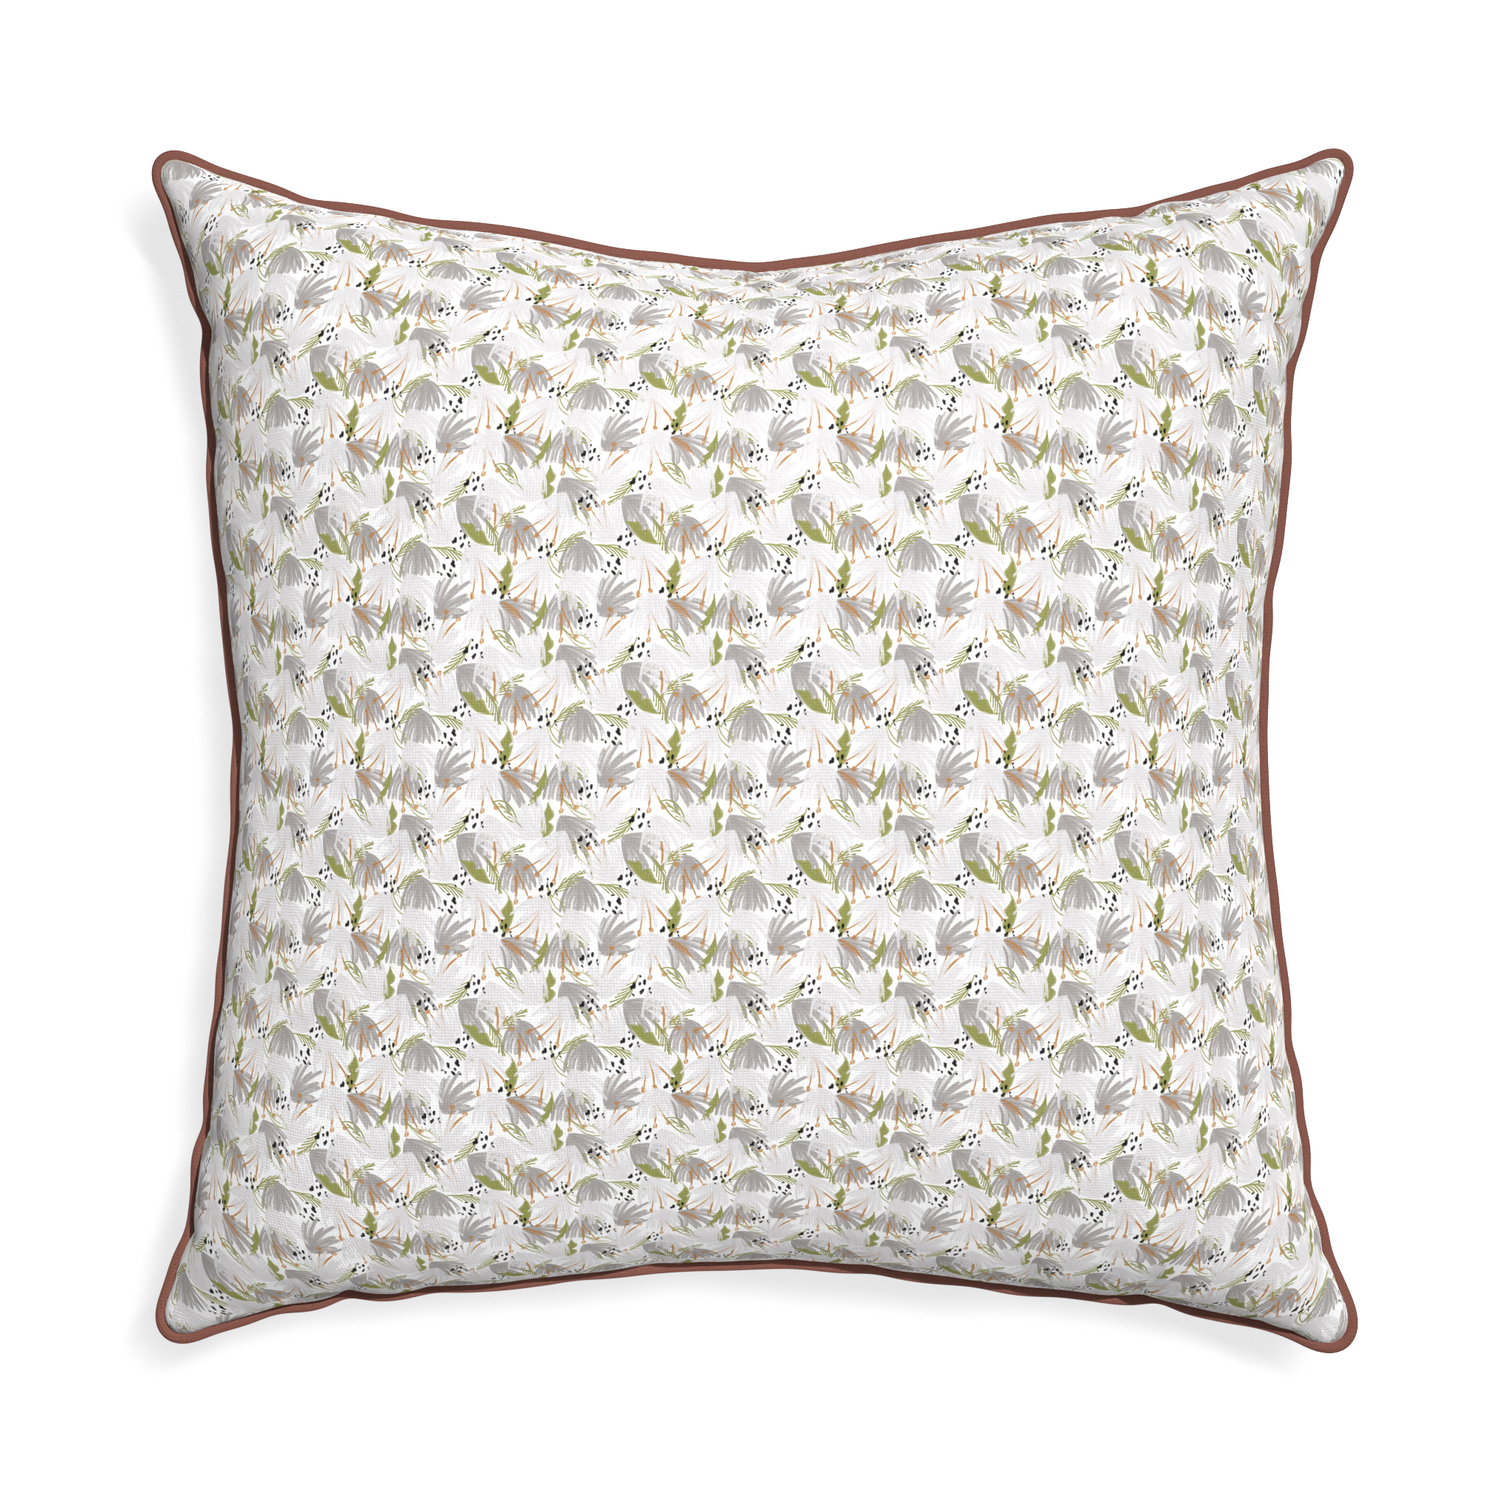 Euro-sham eden grey custom pillow with w piping on white background